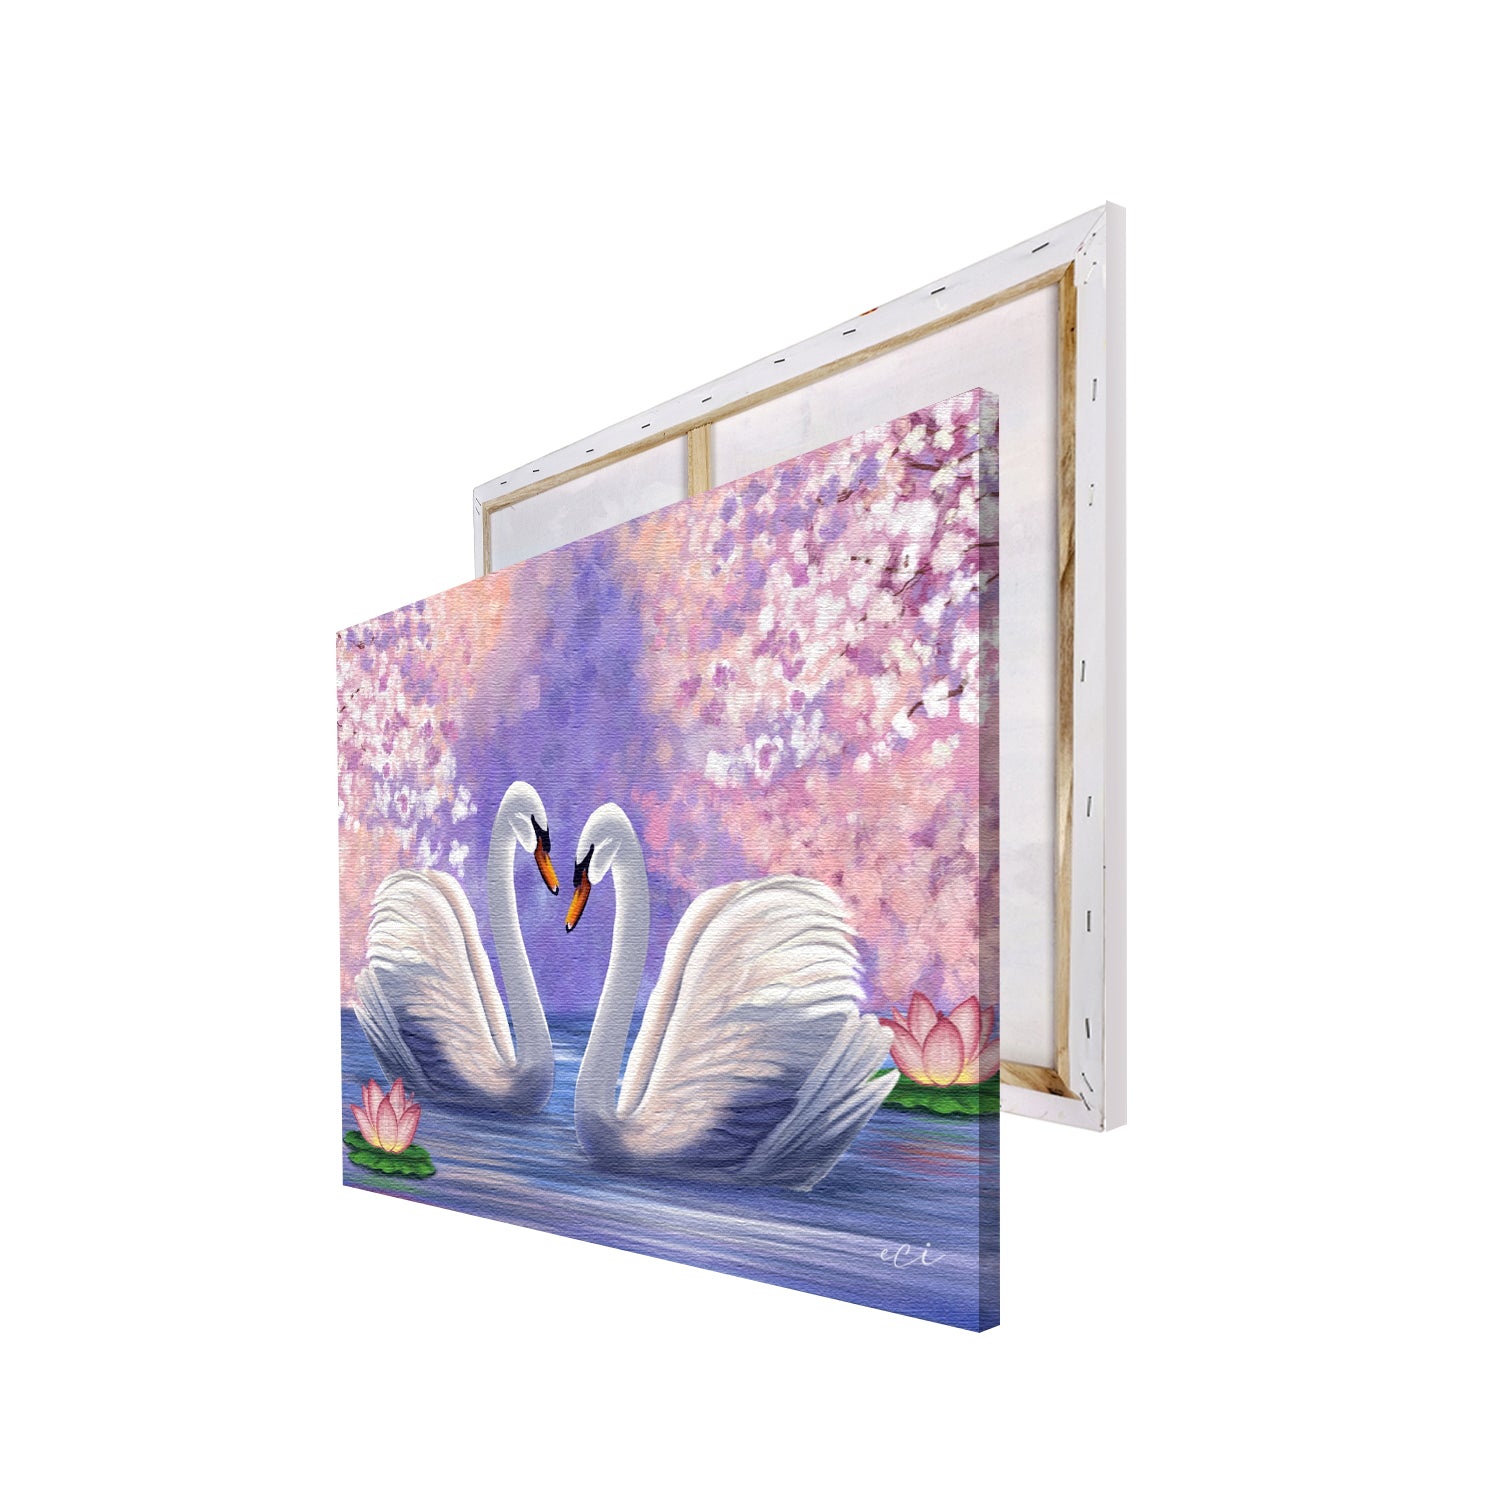 Swan Couple Original Design Canvas Printed Wall Painting 4